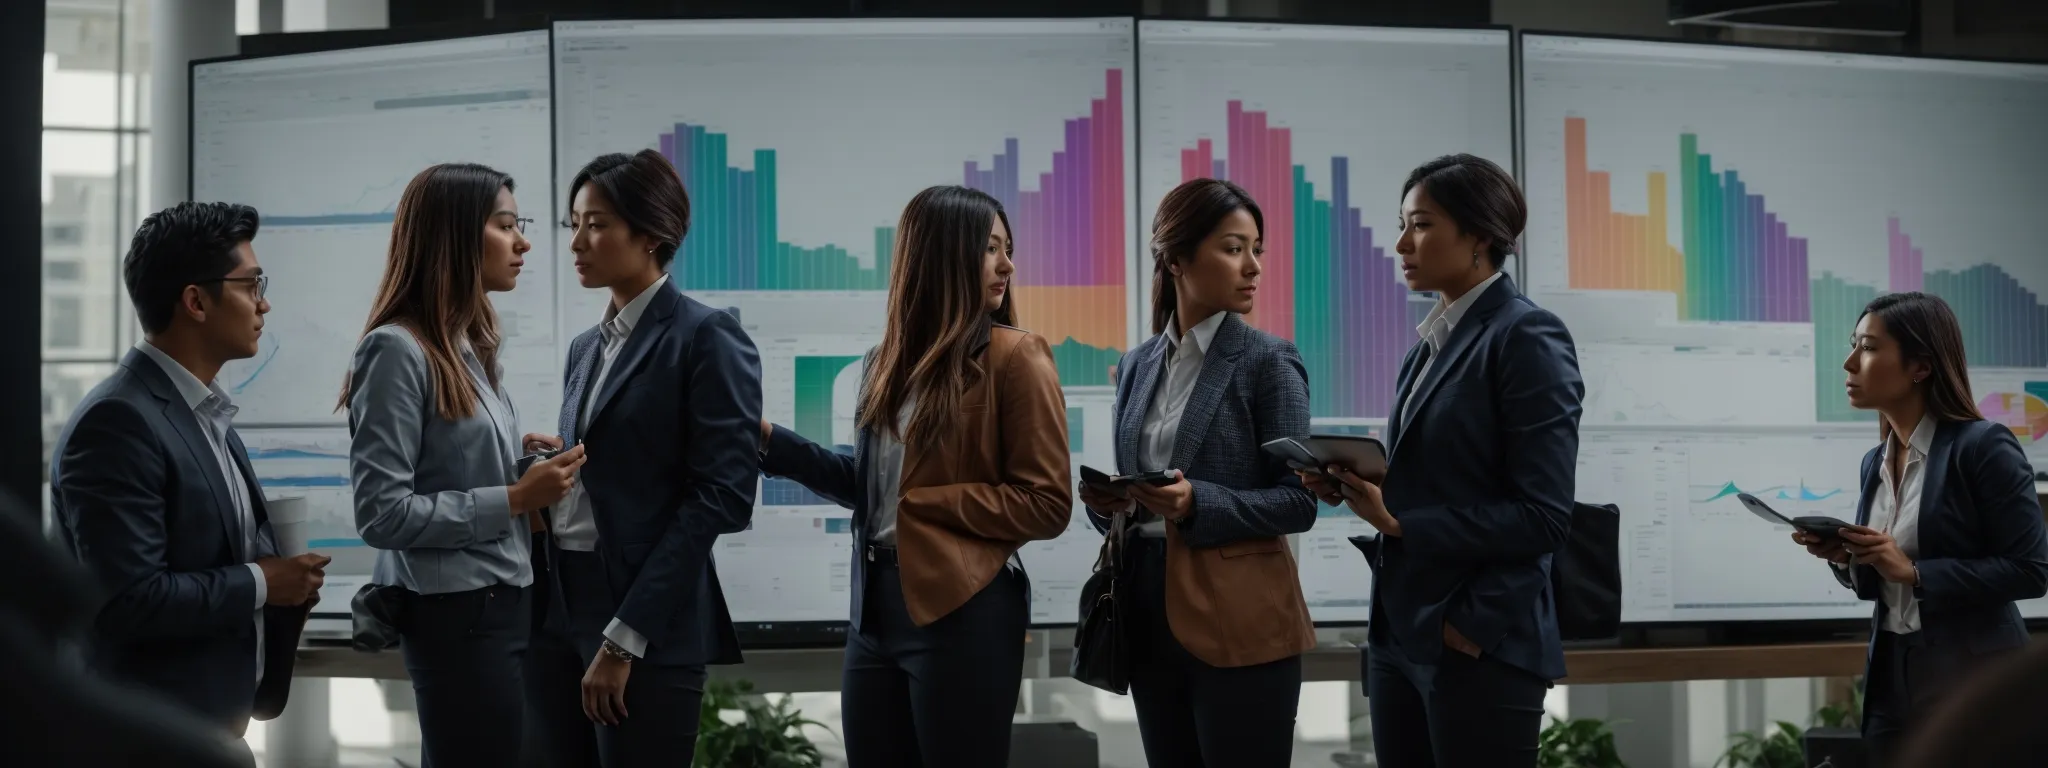 a group of marketing professionals intently reviewing a large screen displaying colorful analytics graphs.